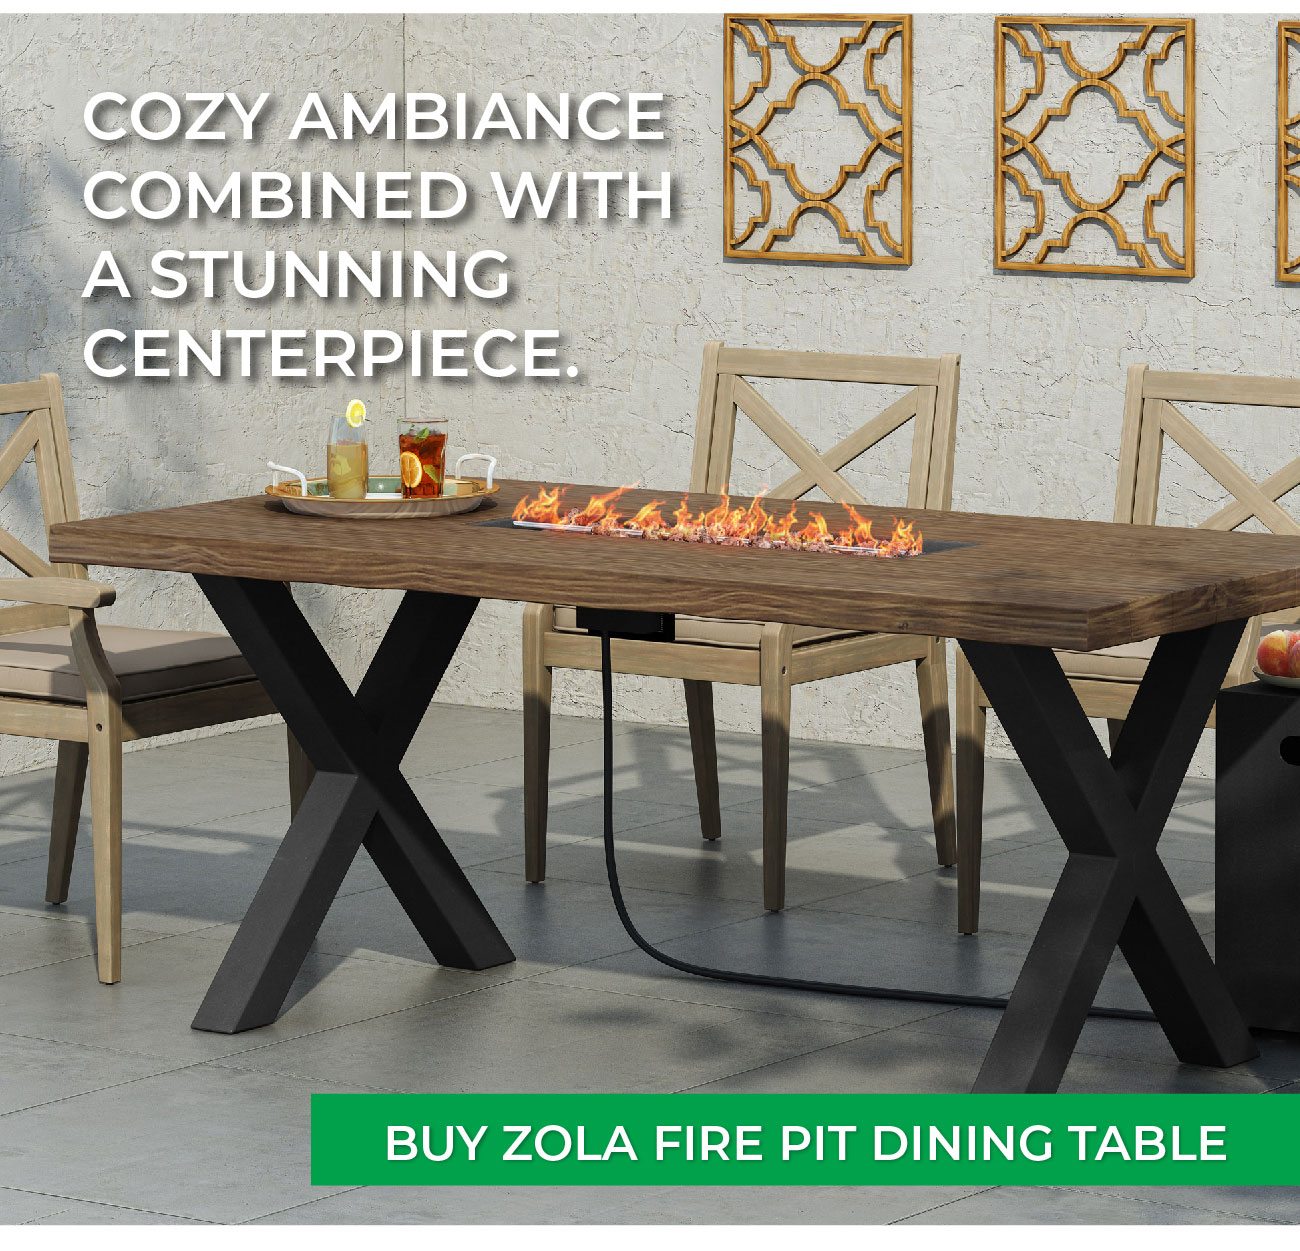 Zola Outdoor Fire Pit Dining Table